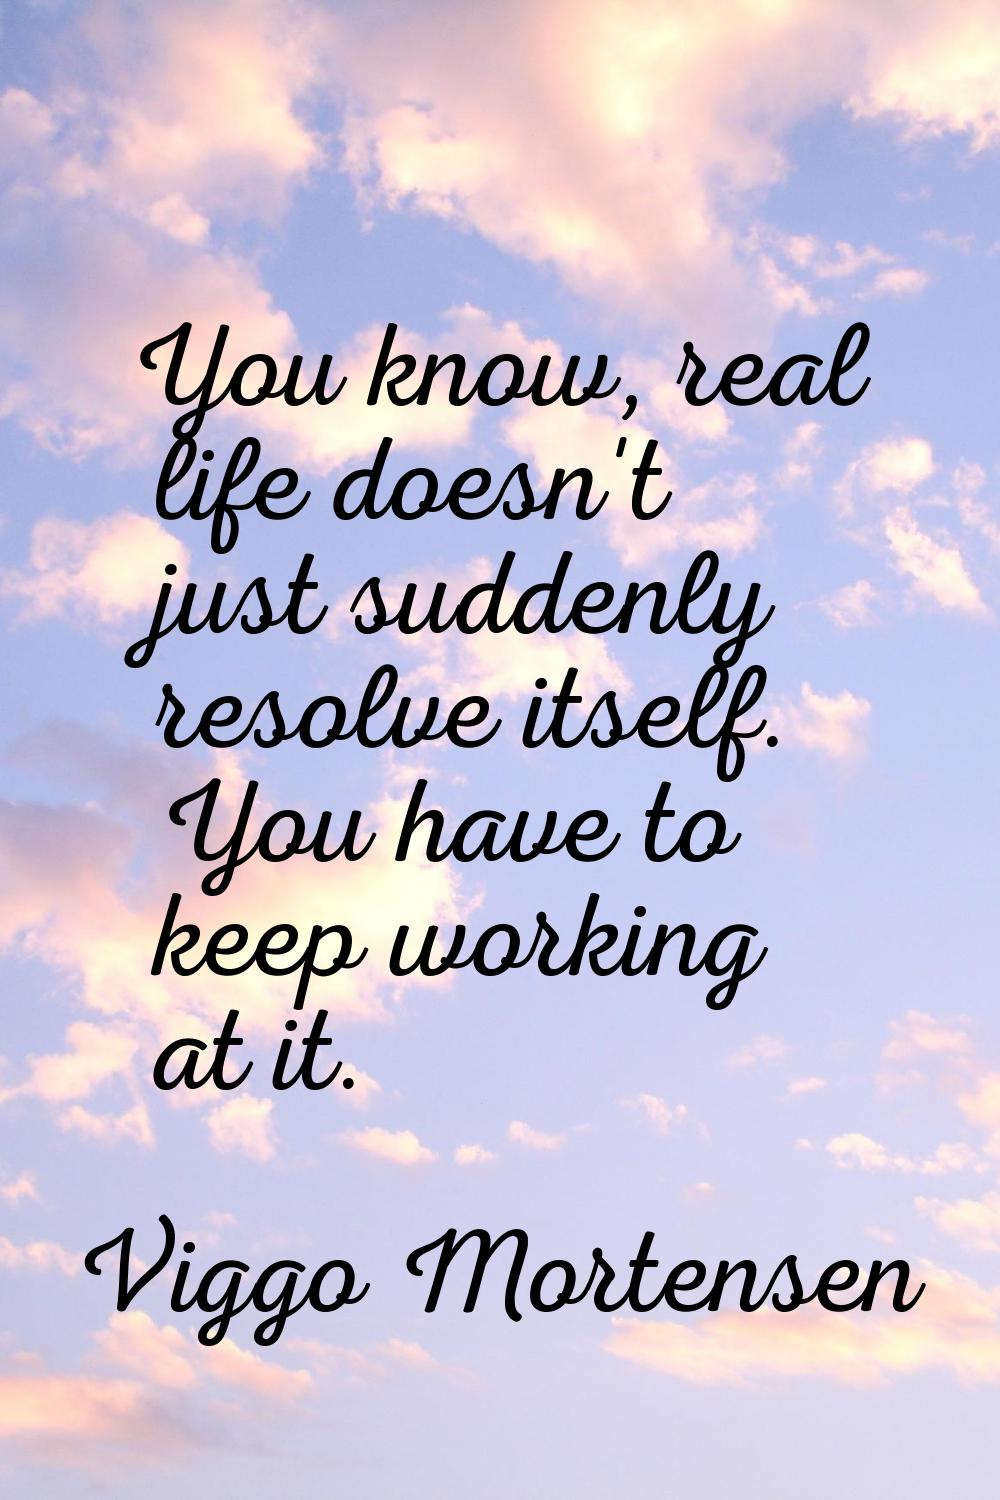 You know, real life doesn't just suddenly resolve itself. You have to keep working at it.